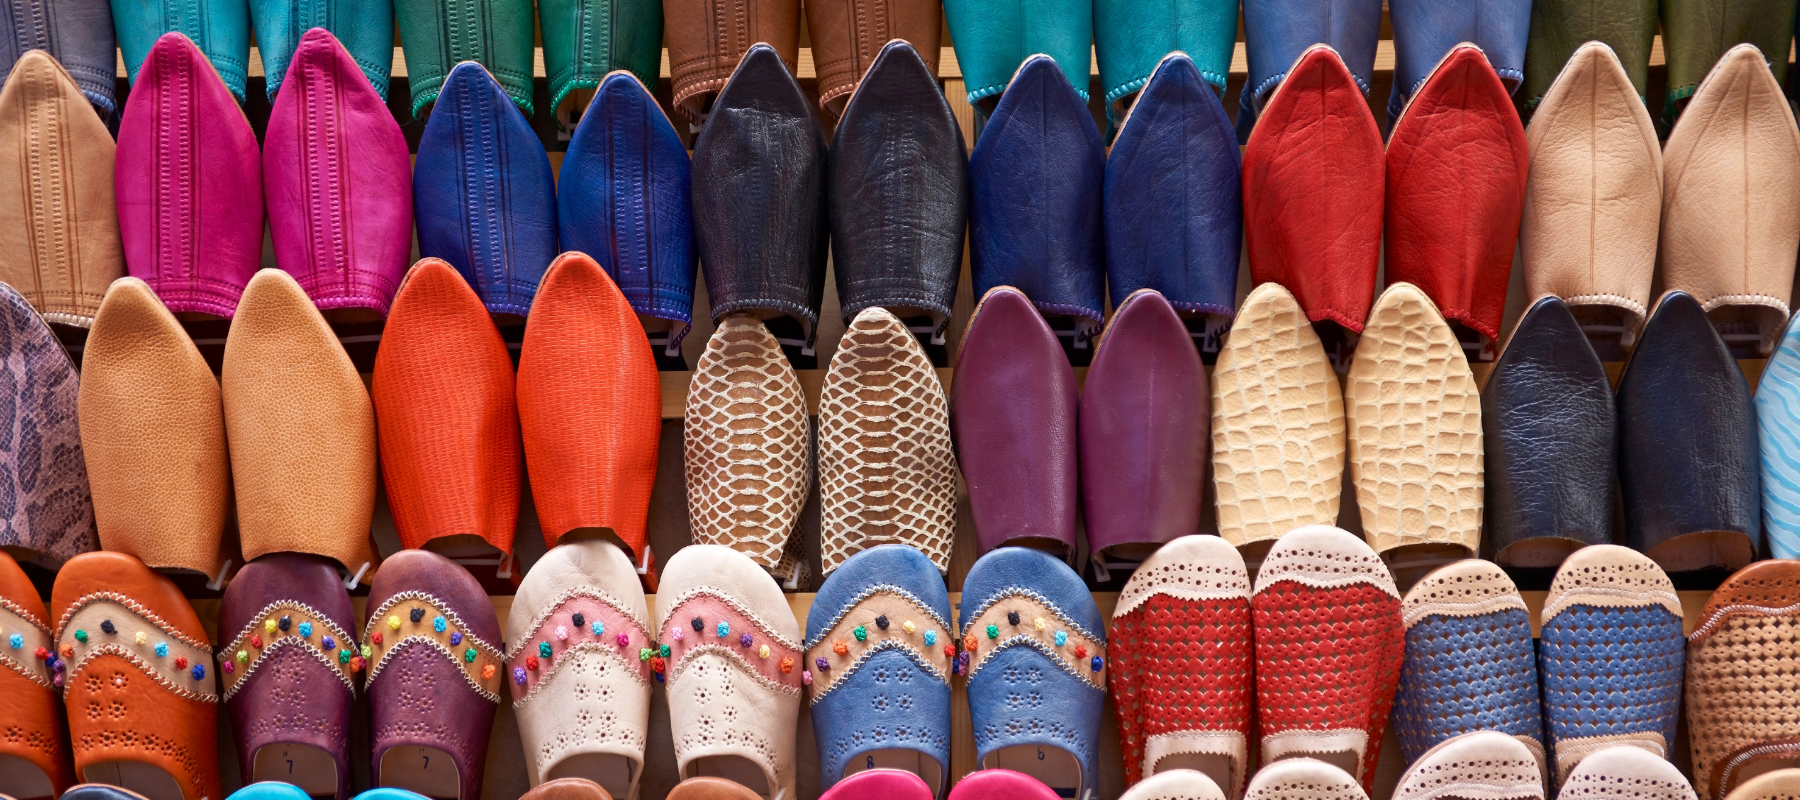 Moroccan slippers sold in a Souk